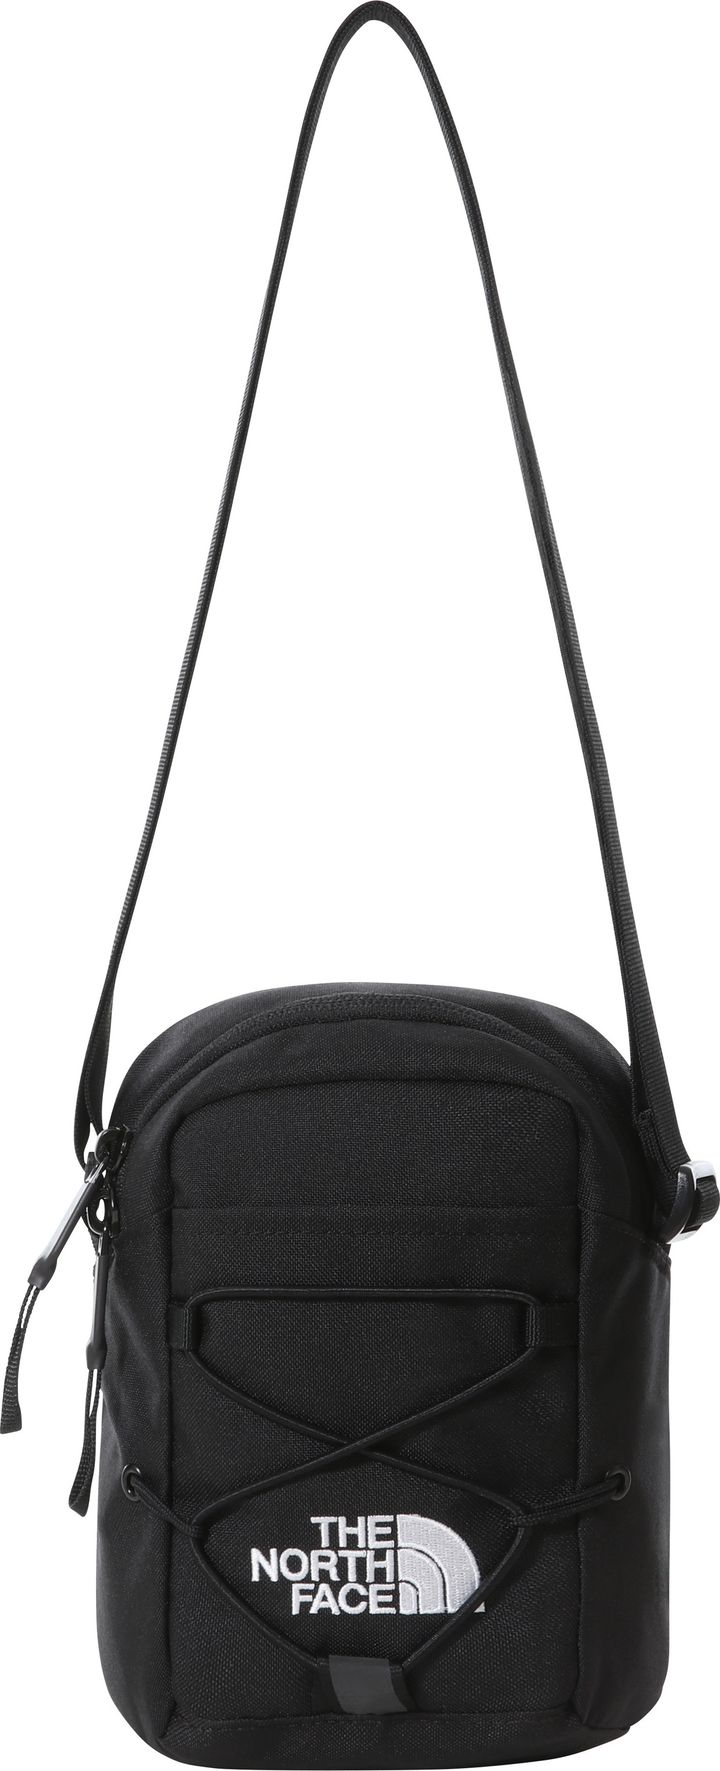 The North Face Jester Cross Body Bag TNF Black The North Face